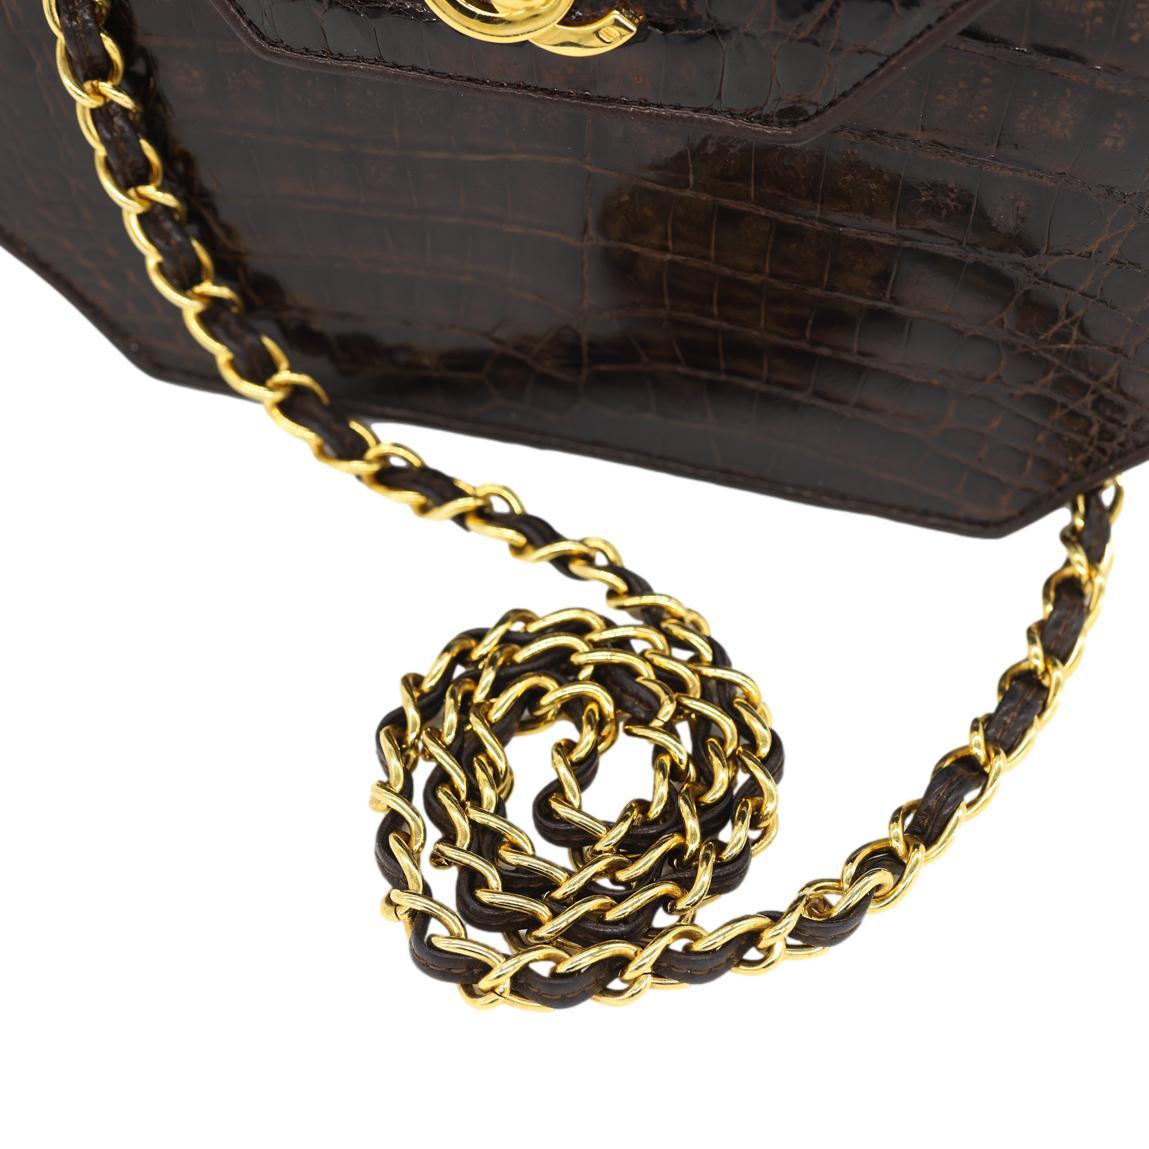 Chanel Brown Alligator Octagon Cross Body Flap Bag with Gold Hardware, 1989. For Sale 9